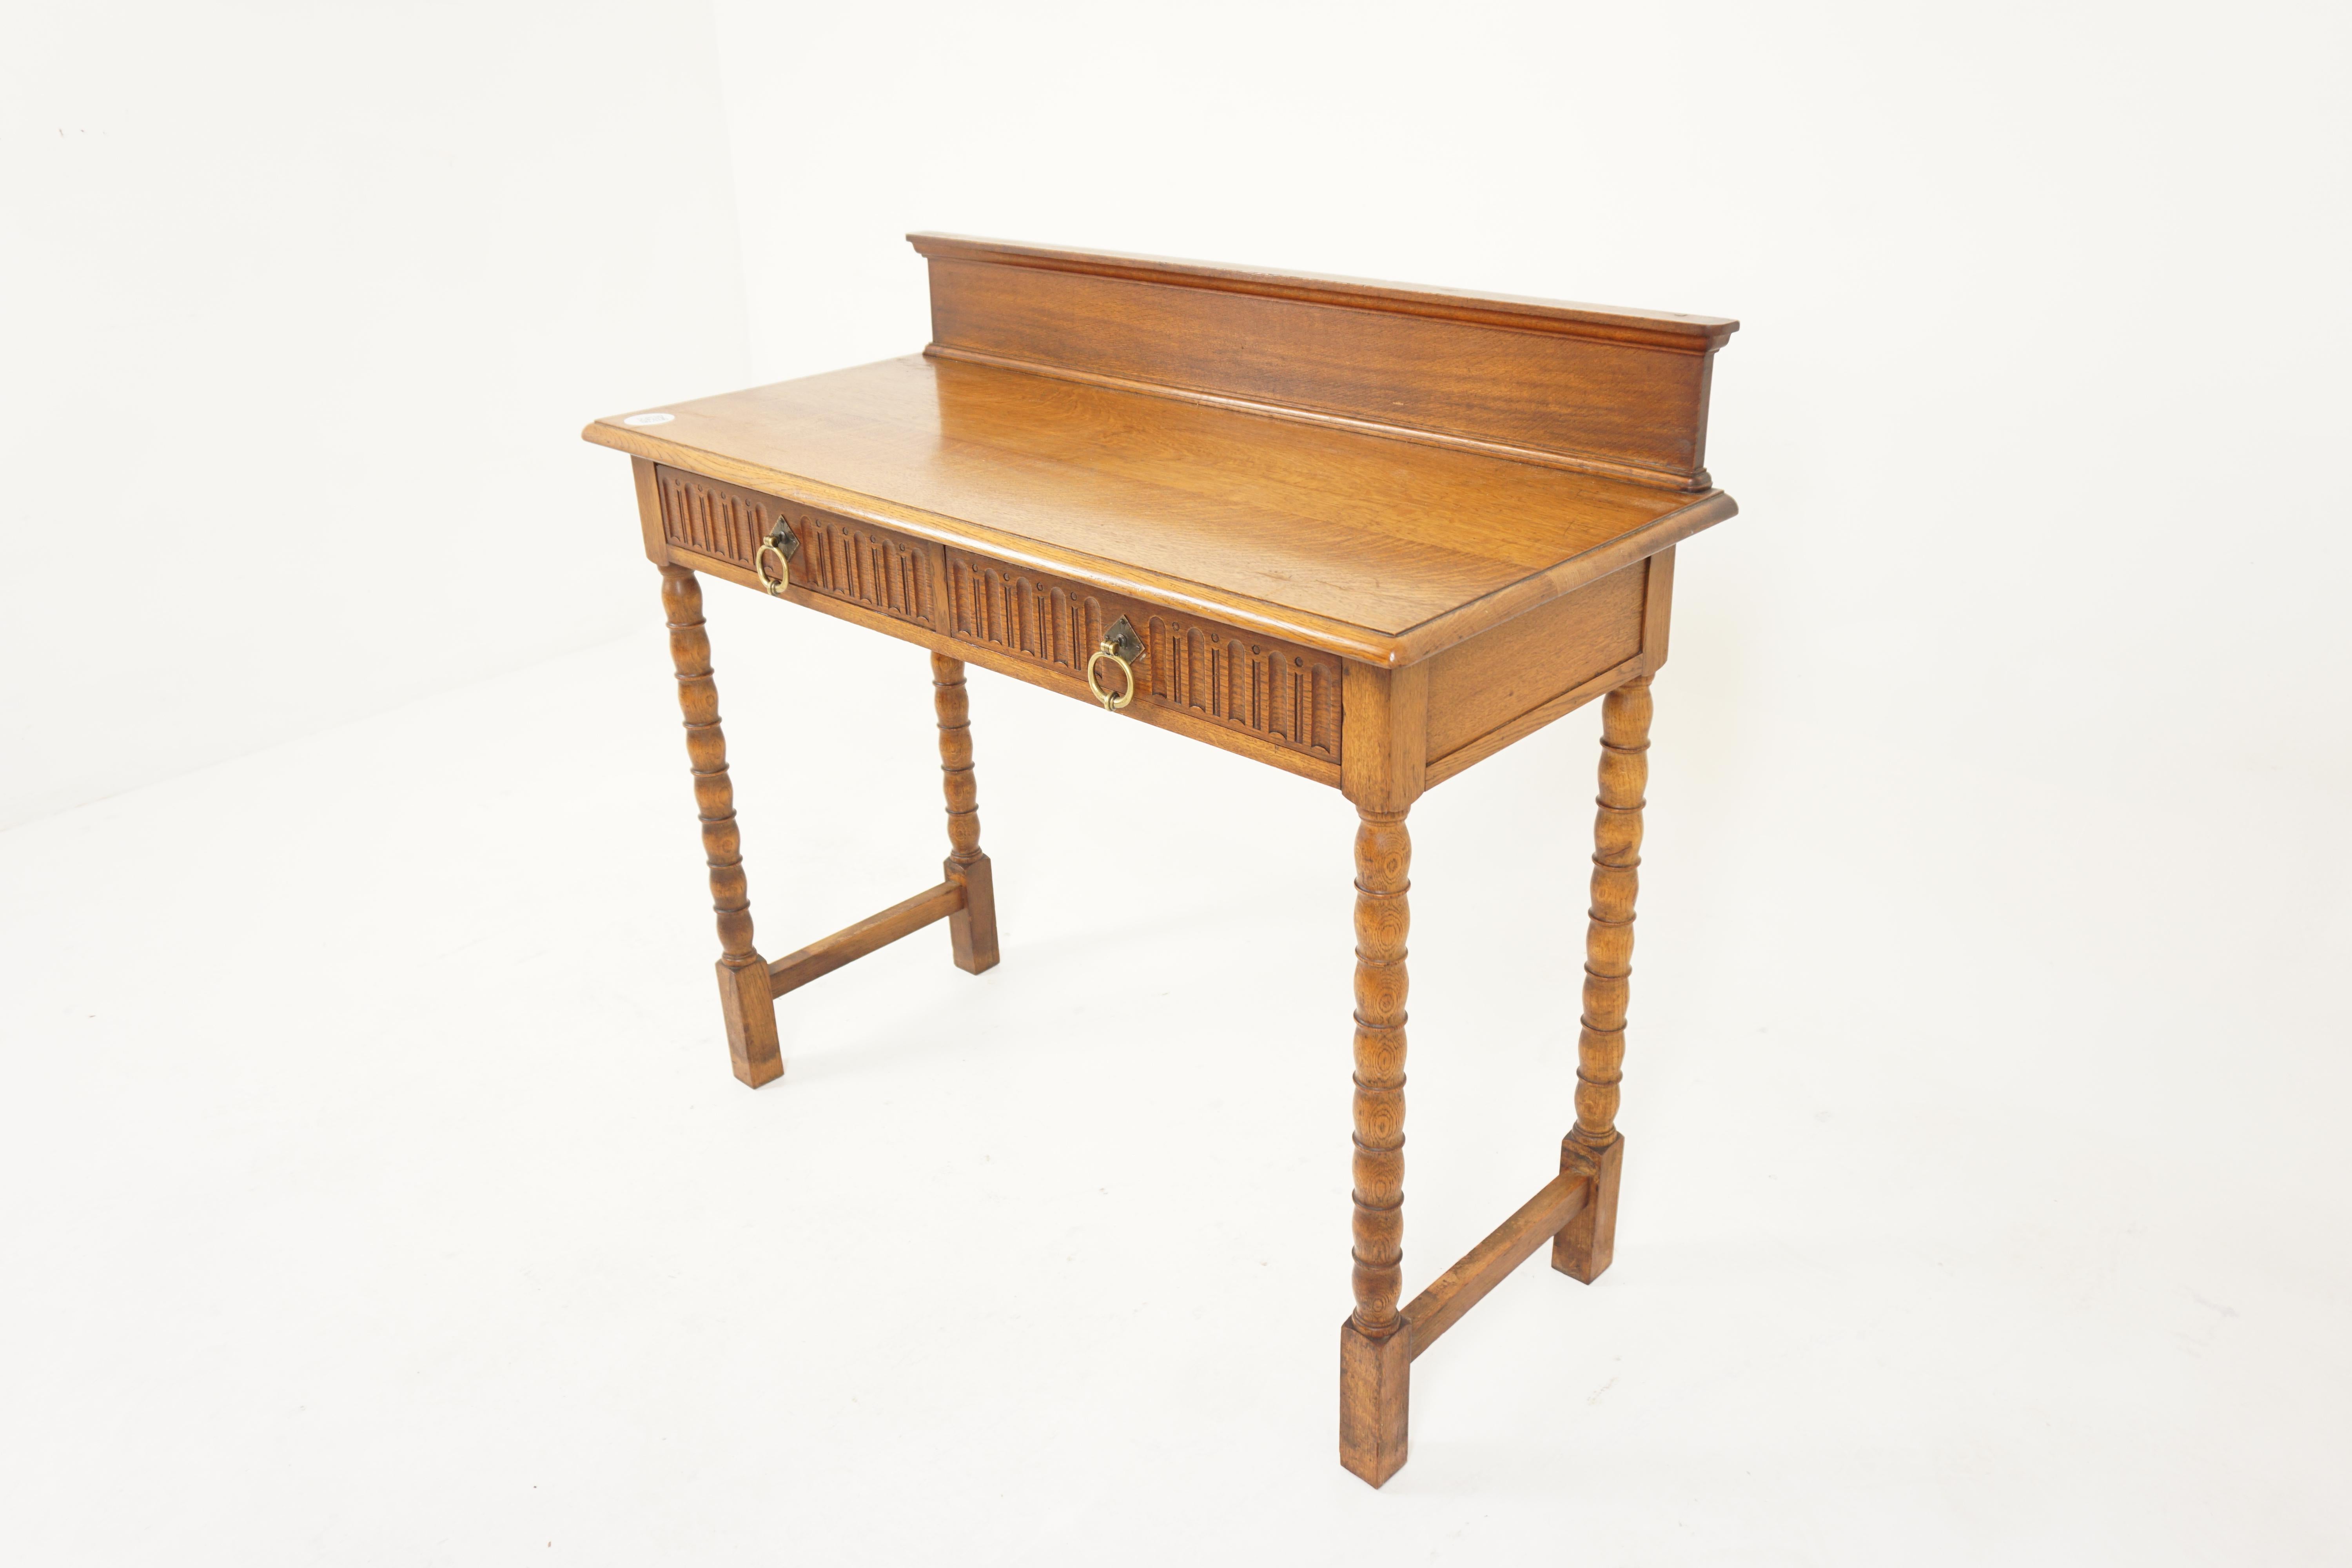 Antique Tiger Oak hall table, Server, sofa table, Scotland 1910, H803

Scotland 1910
Solid Tiger Oak
Original Finish
High gallery back
Rectangular moulded top
Pair of dovetailed drawers with original brass pulls.
All standing on four tall